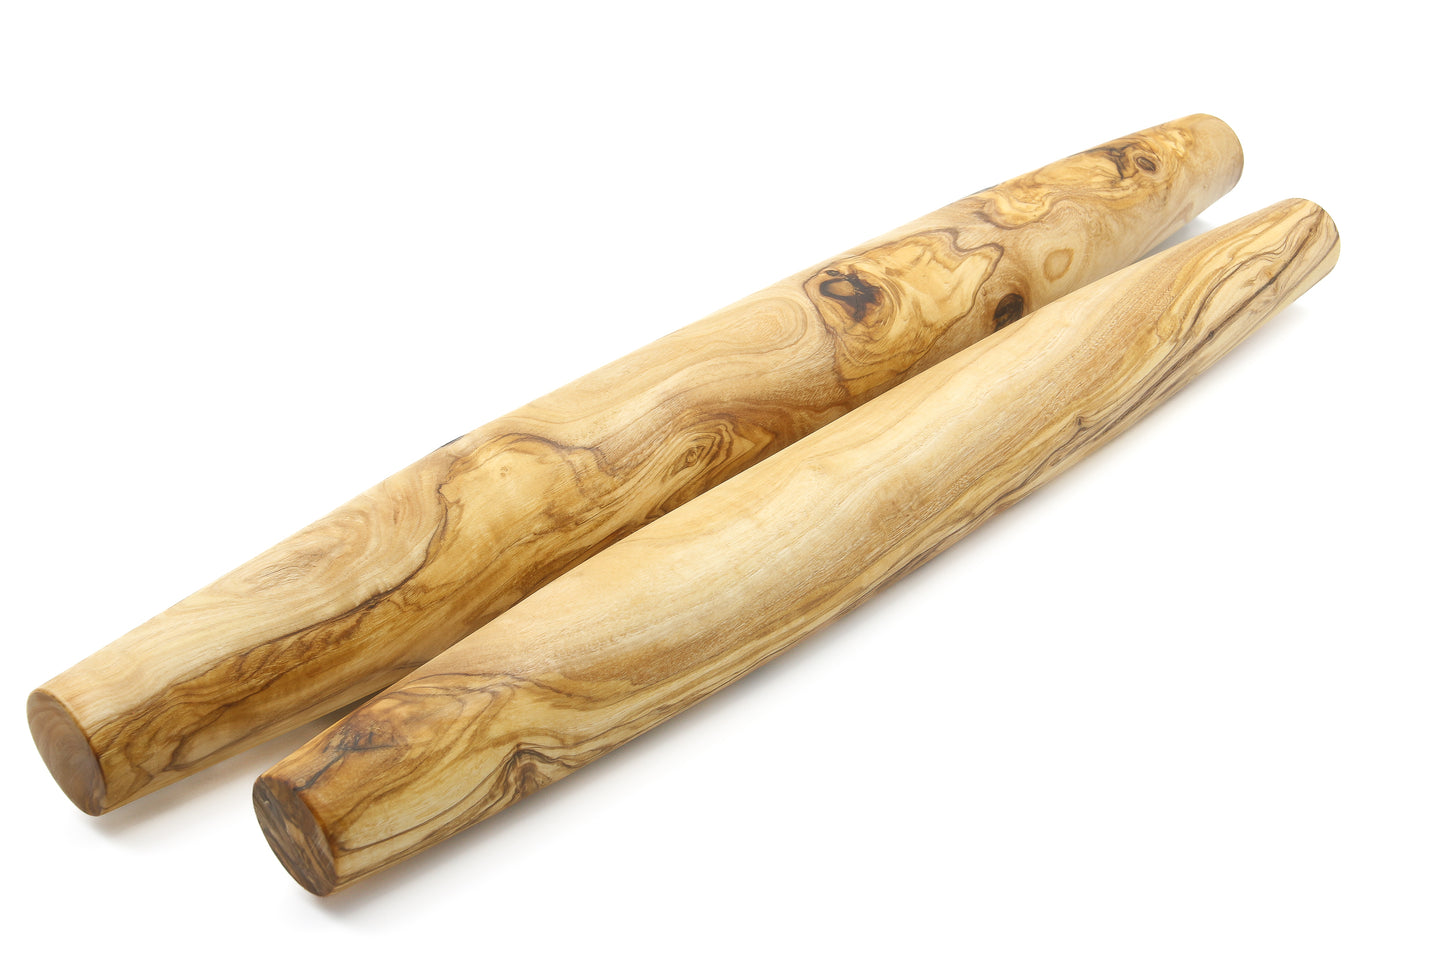 Artisan-crafted olive wood tool for perfect pastry